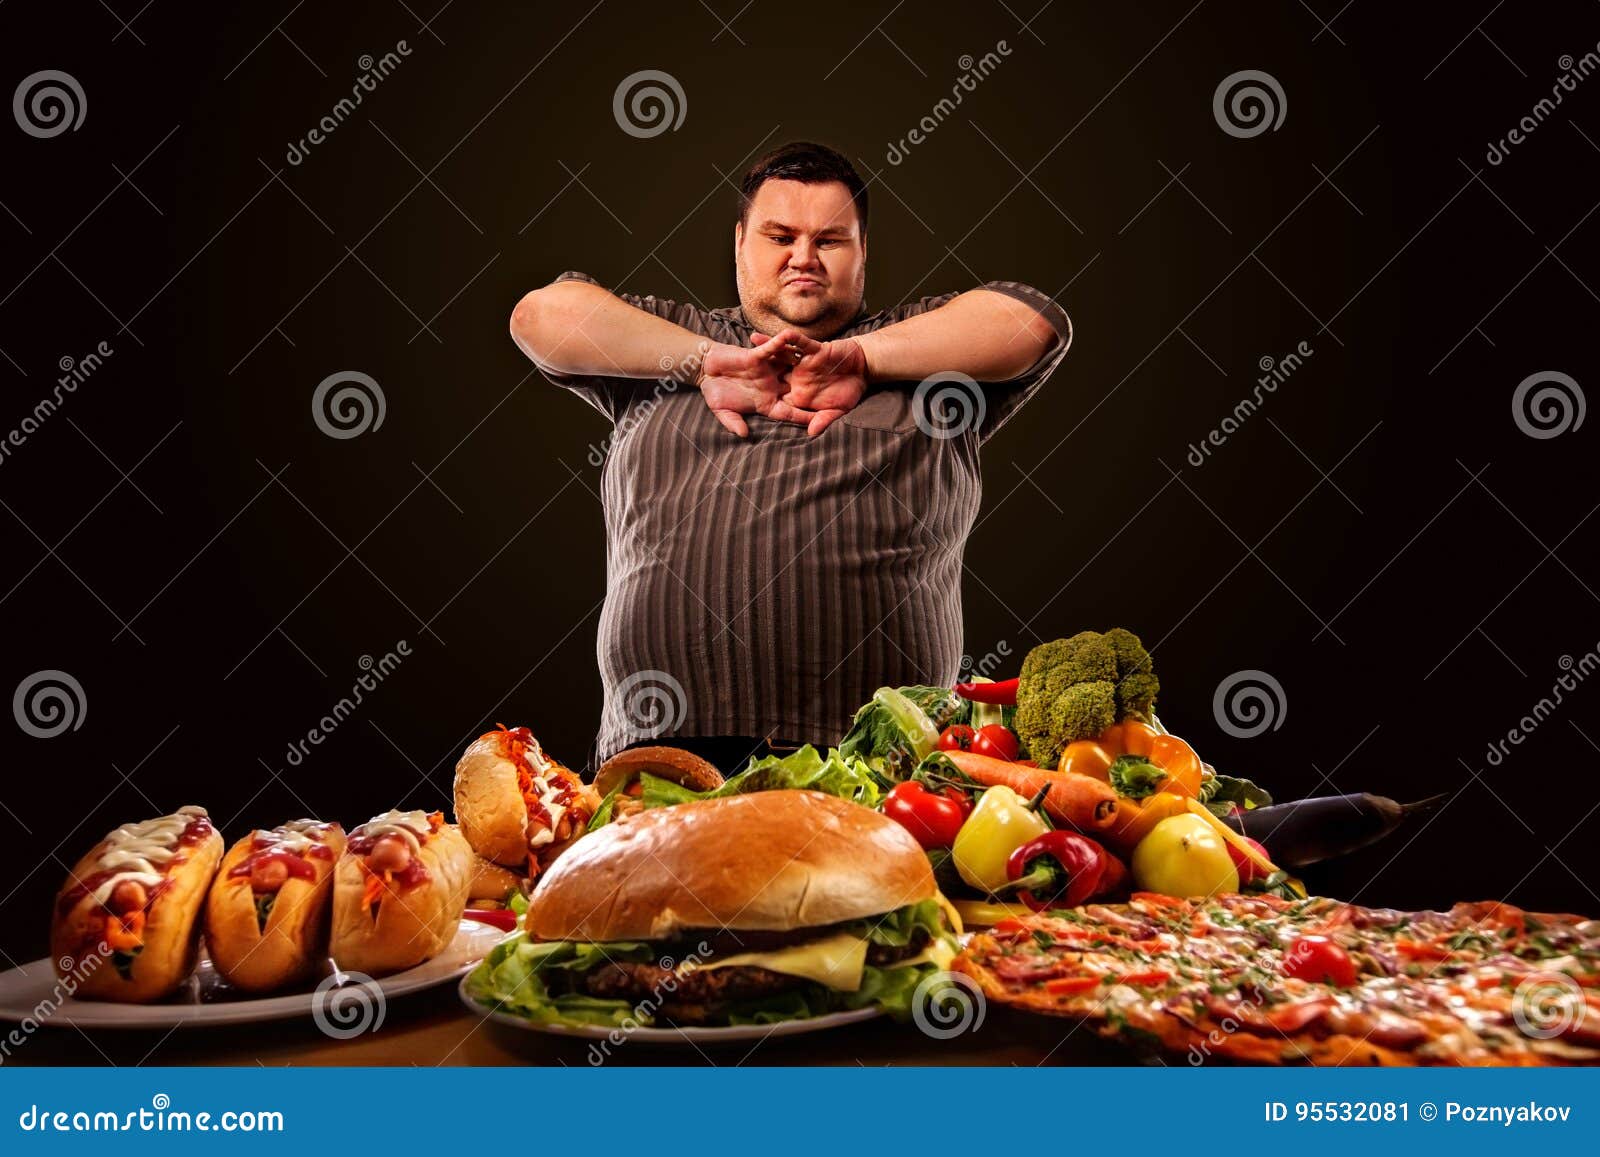 Fat Stock Photos - Royalty Free Stock Images1300 x 957